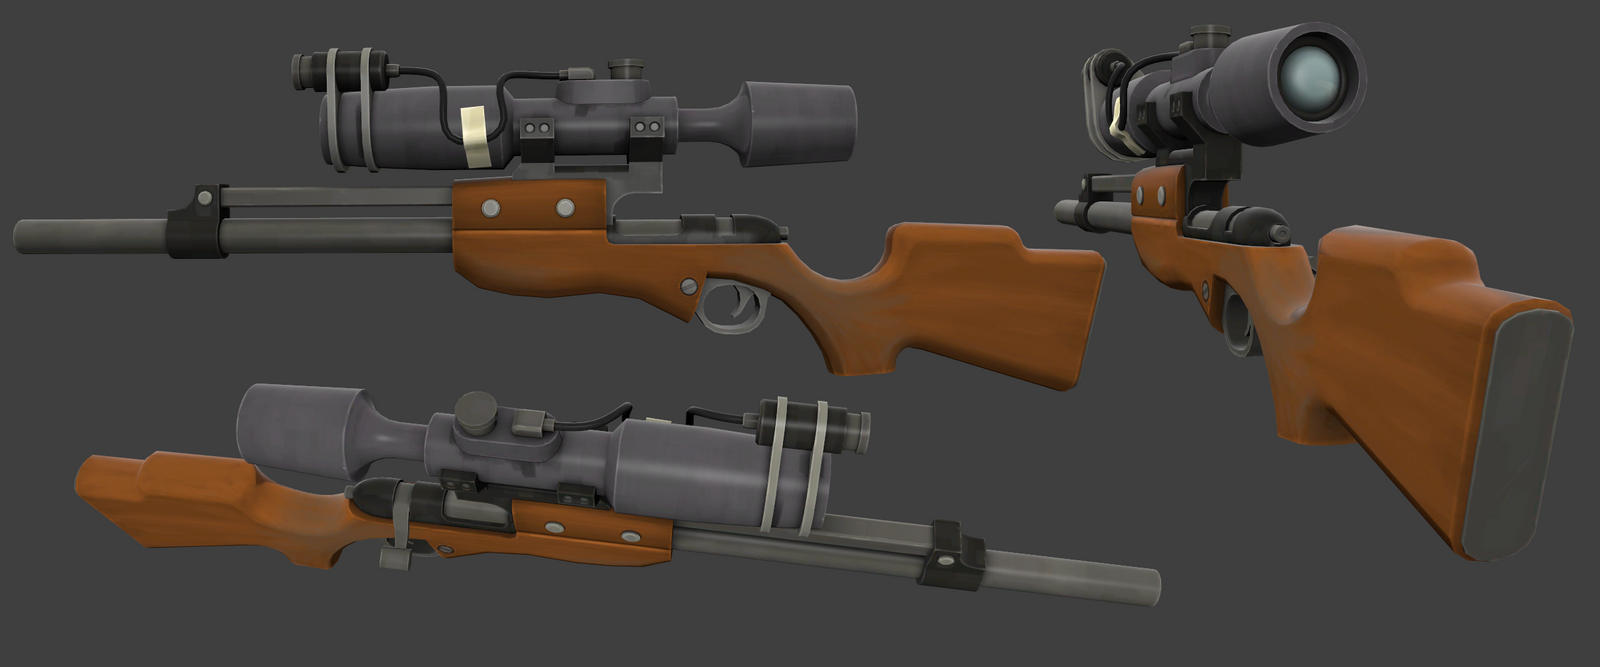 tf2_sniper_rifle_done_by_elbagast-d39jgqr.png